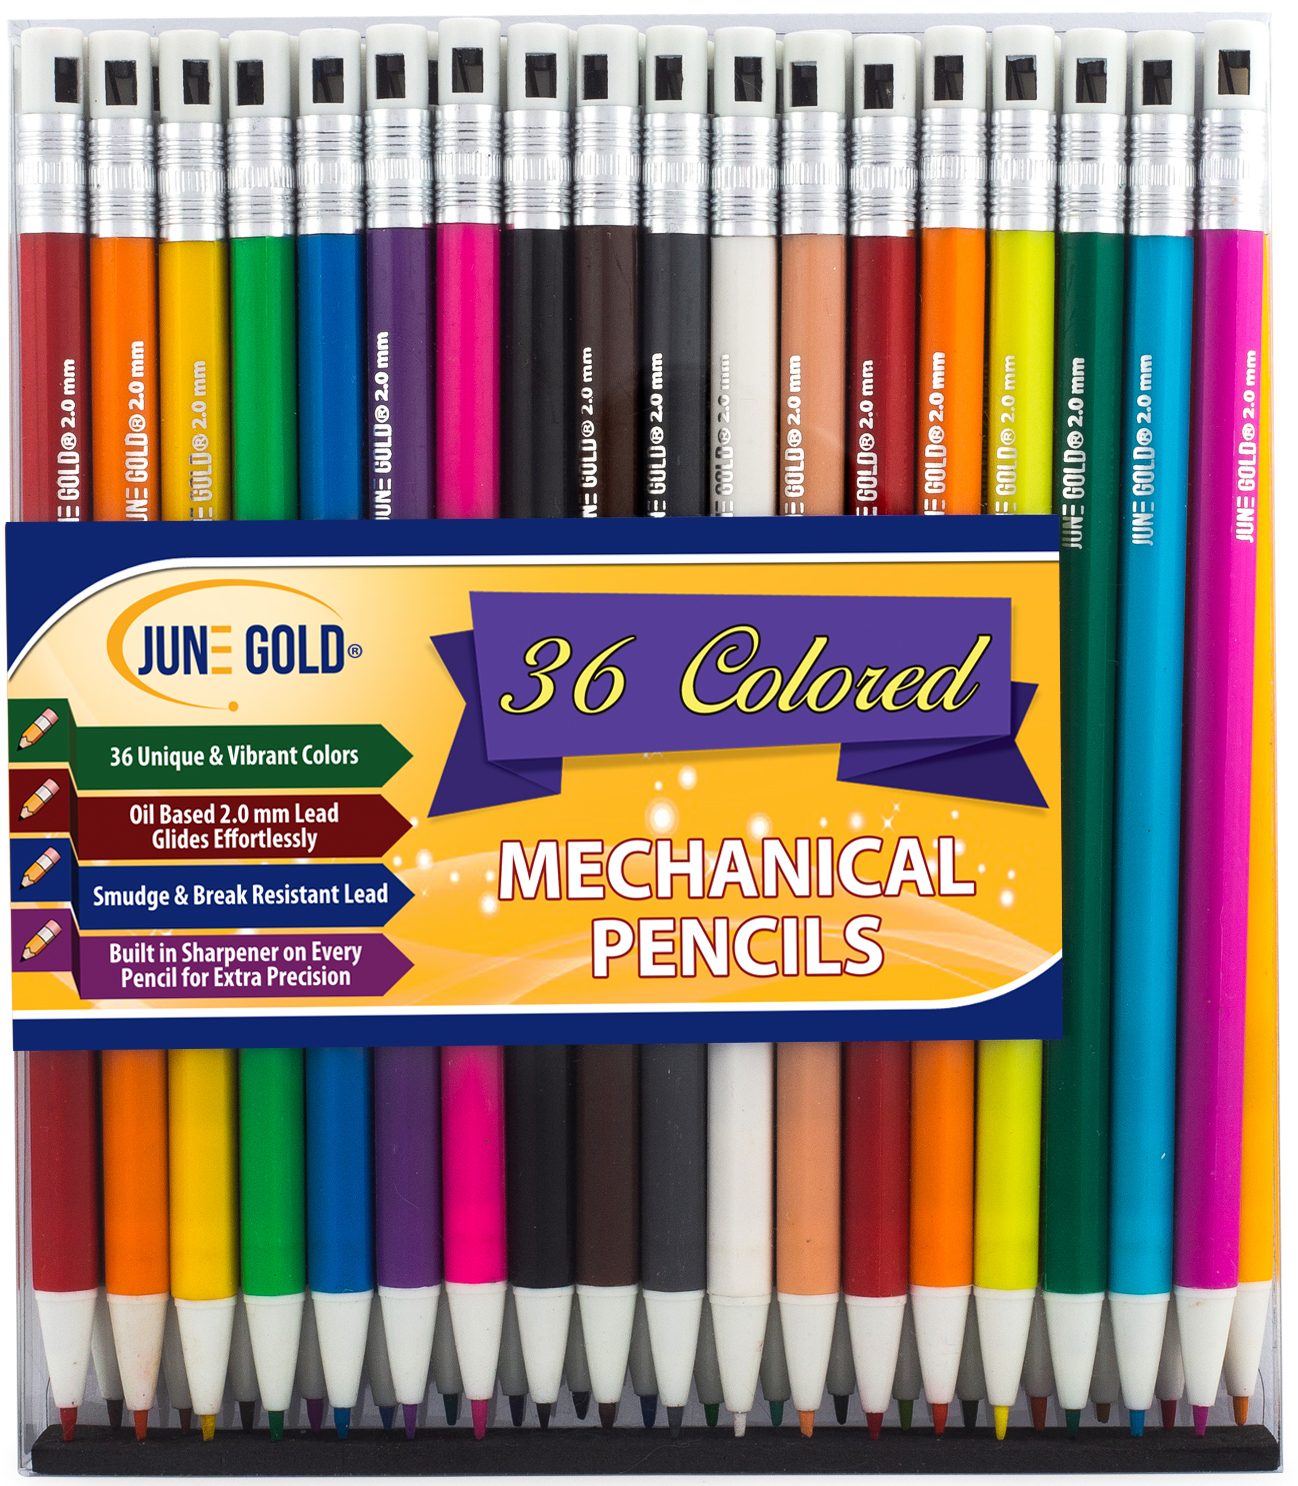 Hokusei Pencil 10805 Colored Pencils, 36 Colors, Girl Pattern, Can :  : Stationery & Office Products